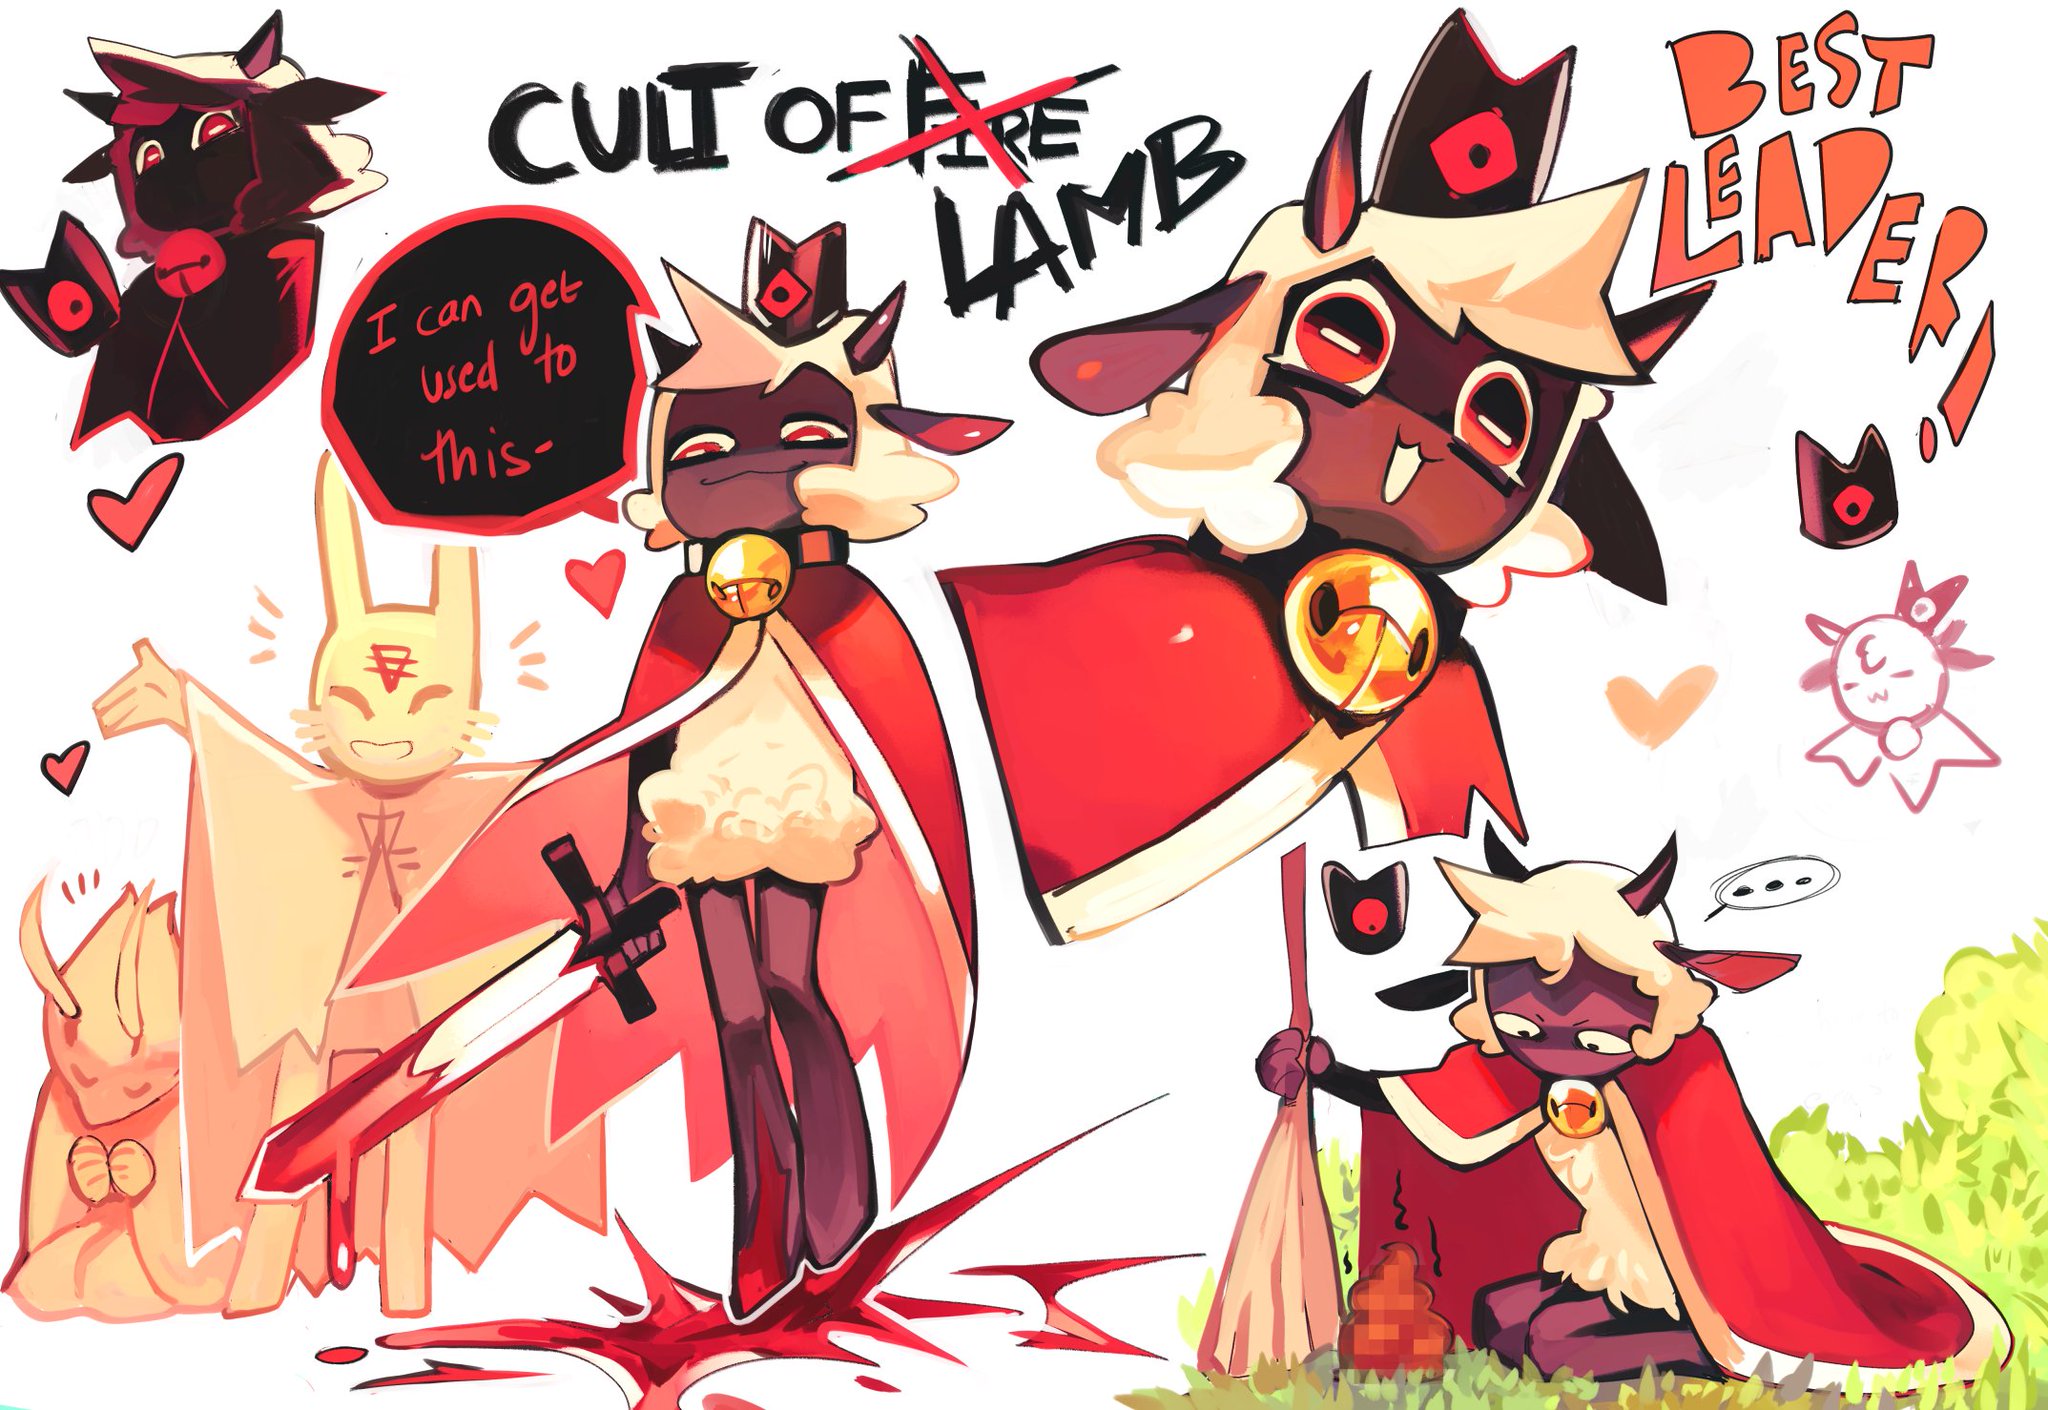 Cult of the Lamb Twitter interactions are top-tier: : r/TwoBestFriendsPlay